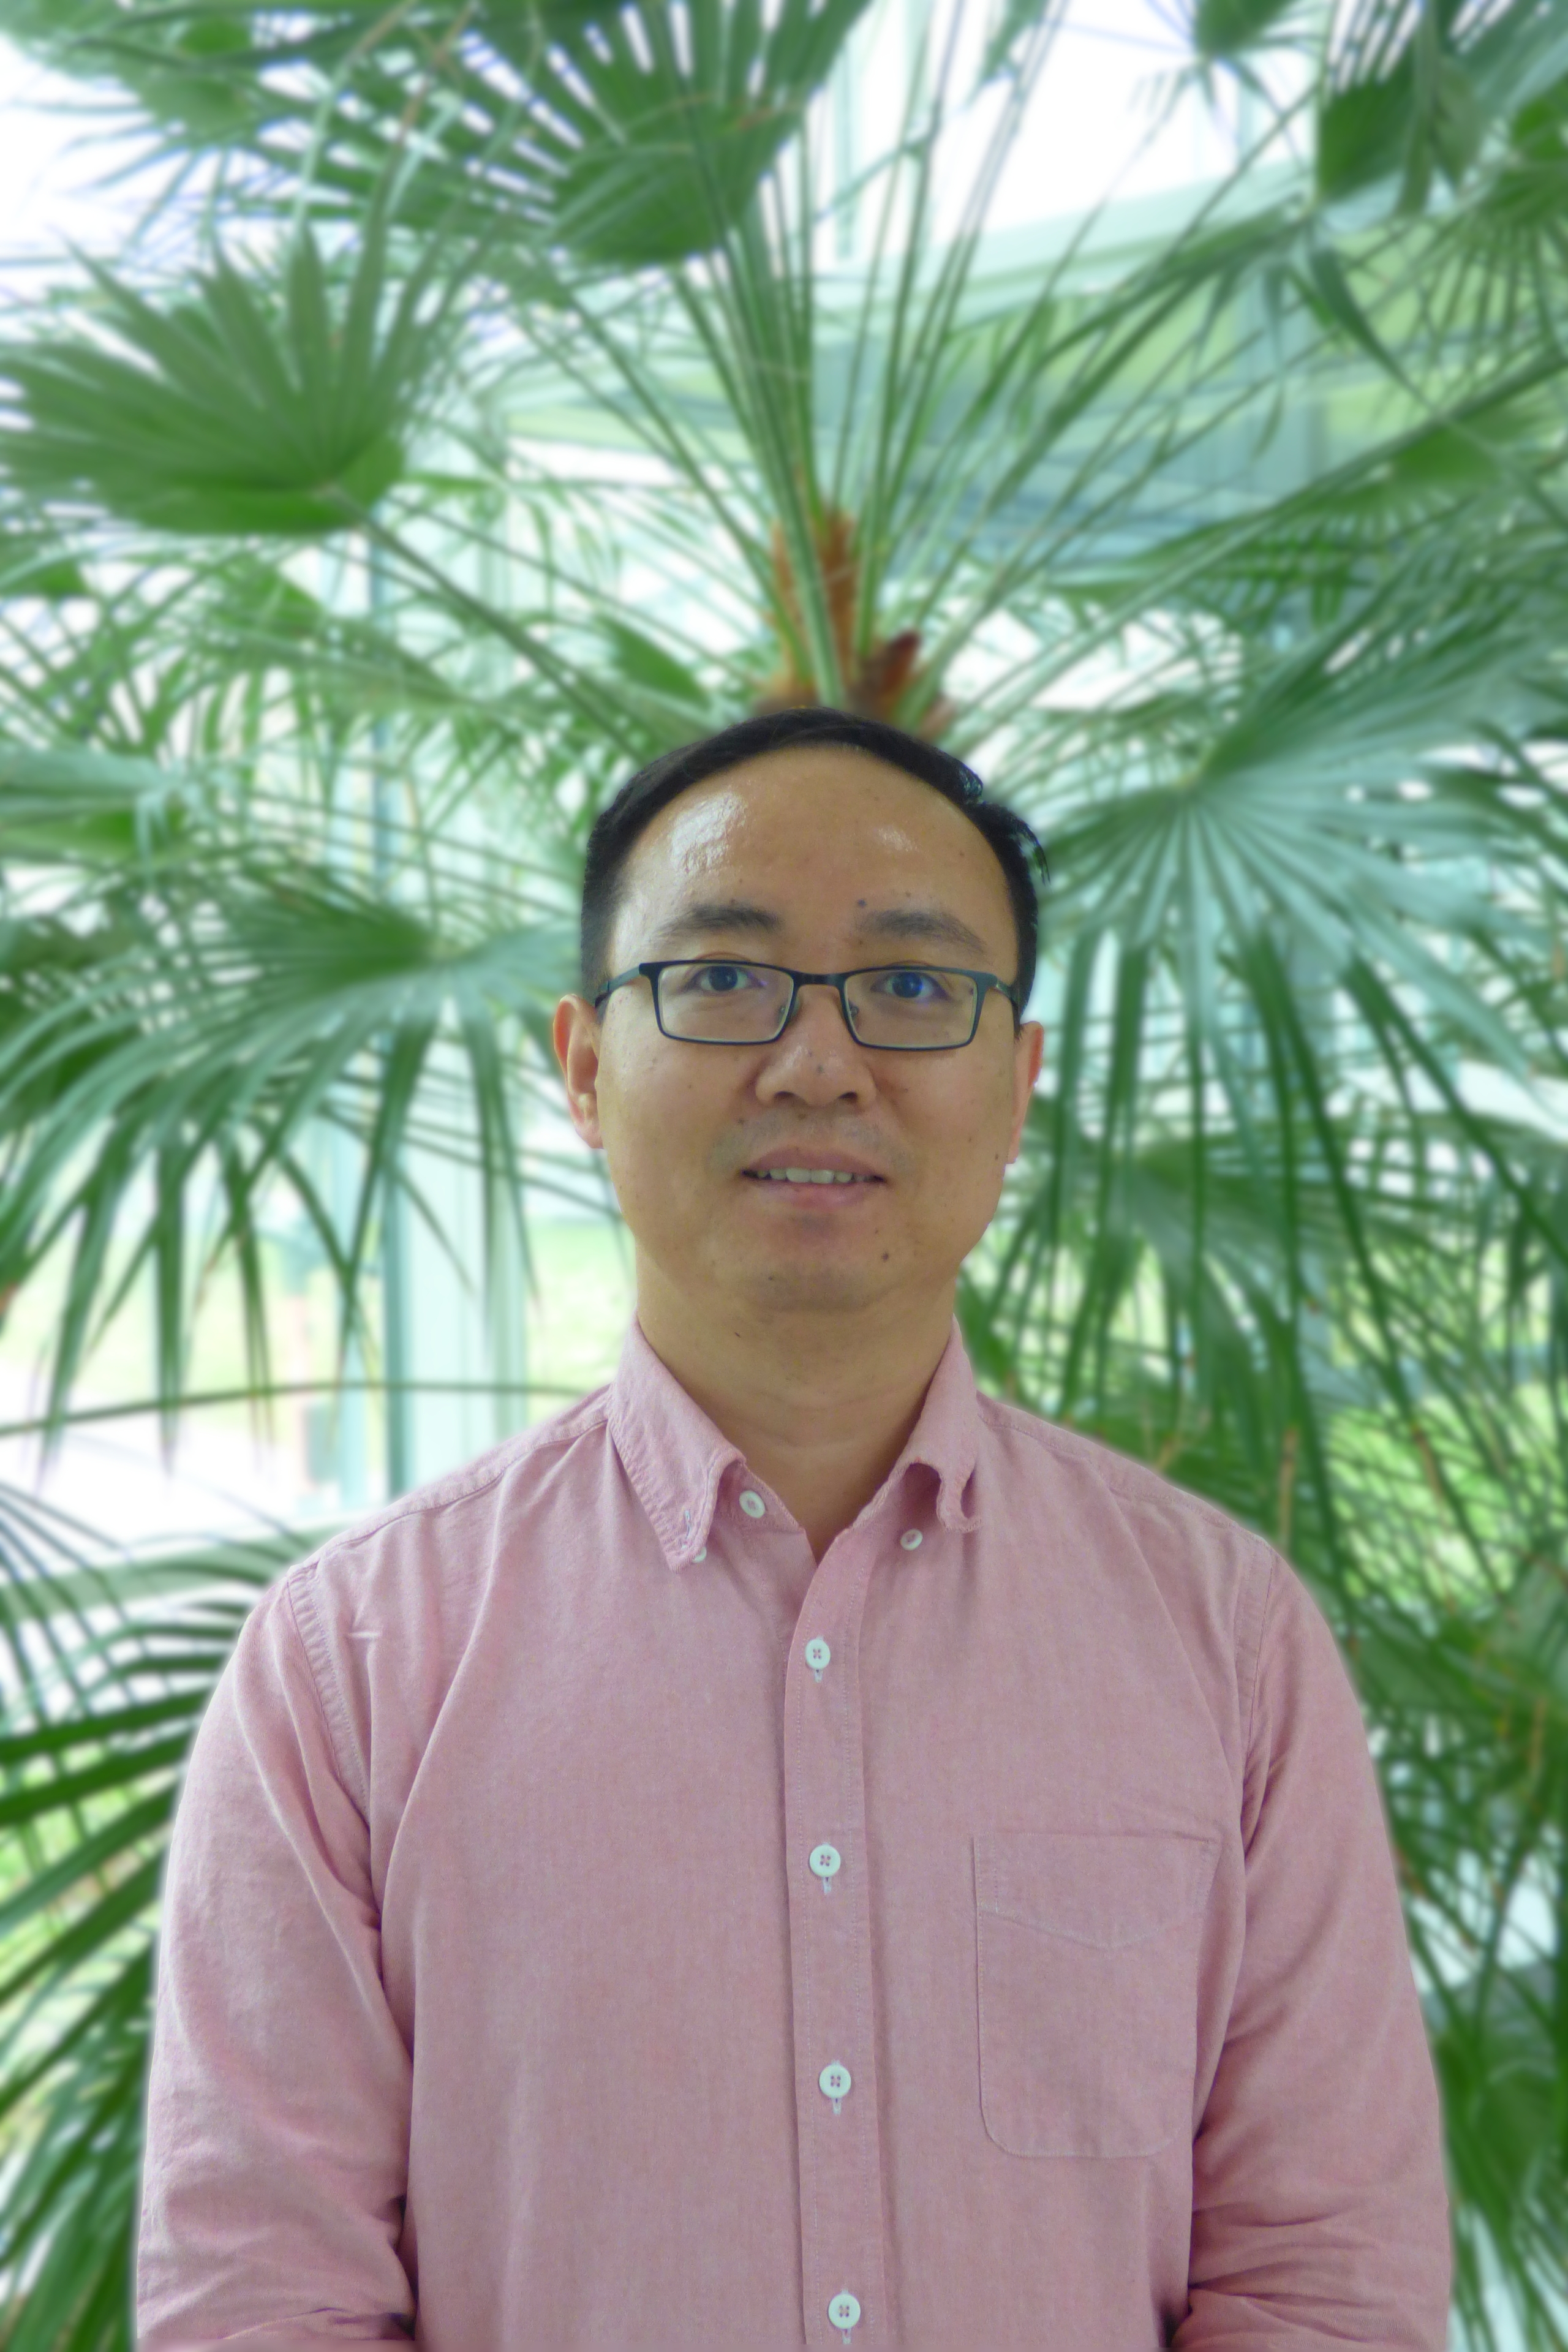 This image shows Dr. Xin Zhang